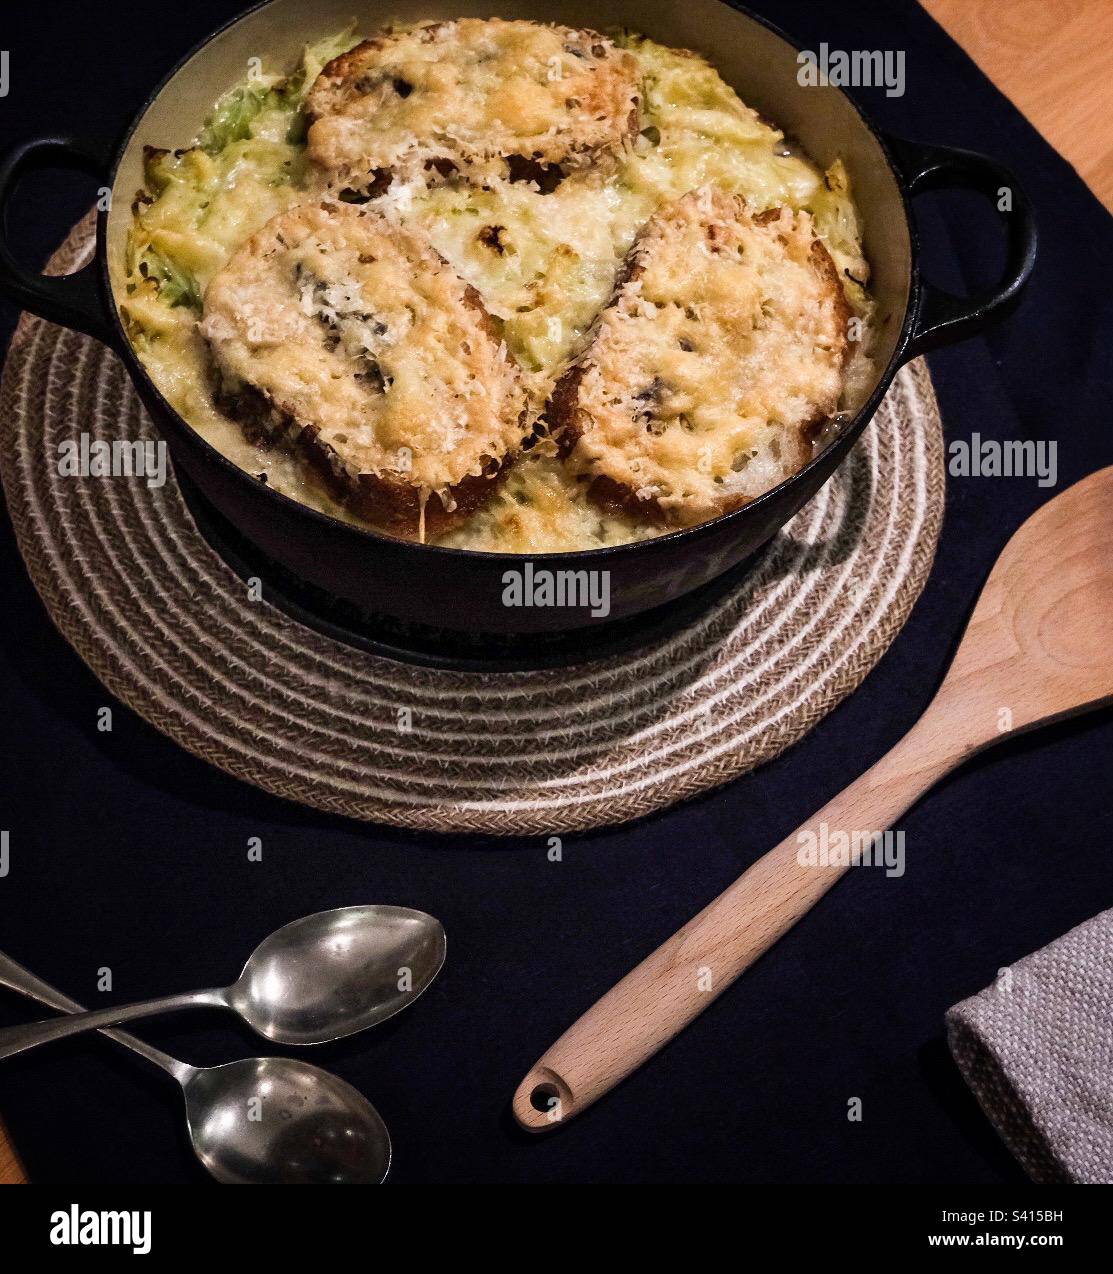 A hearty dish of Zuppa d’Aosta being served on a table with spoons and napkins Stock Photo